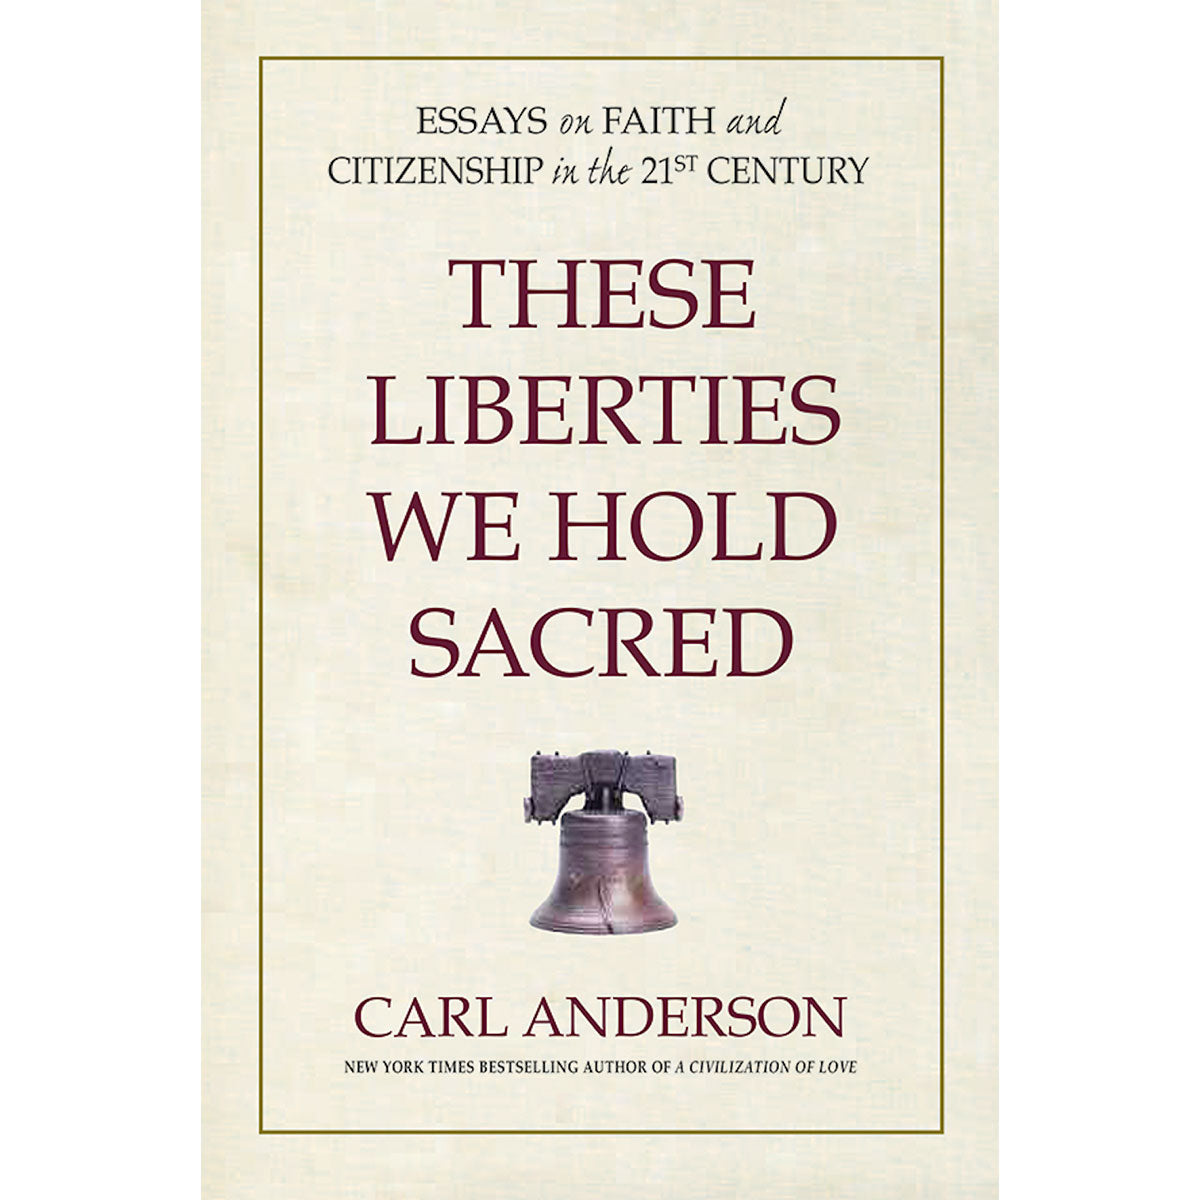 These Liberties We Hold Sacred: Essays on Faith and Citizenship in the 21st Century